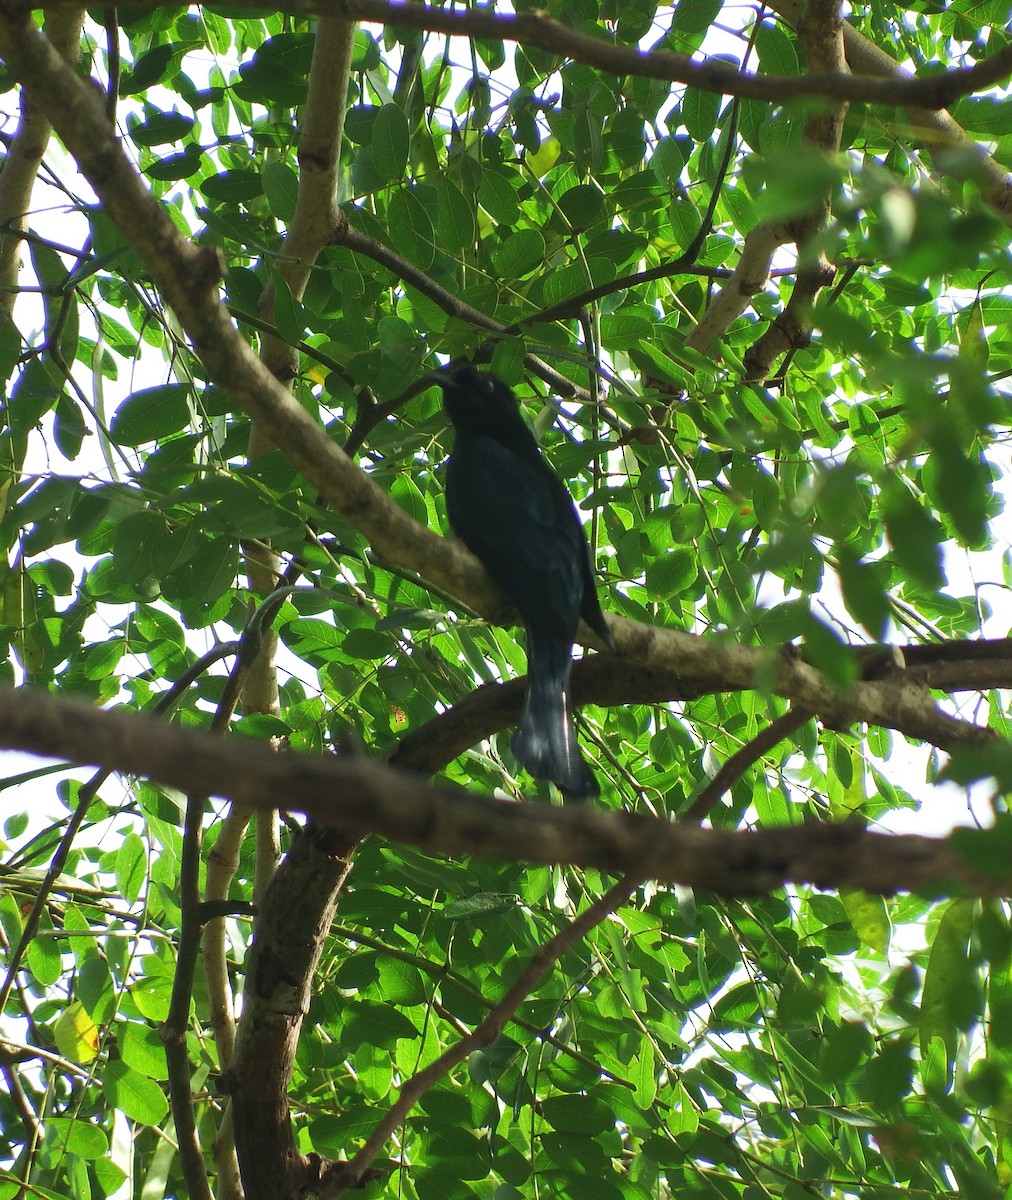 Square-tailed Drongo-Cuckoo - Ben Weil